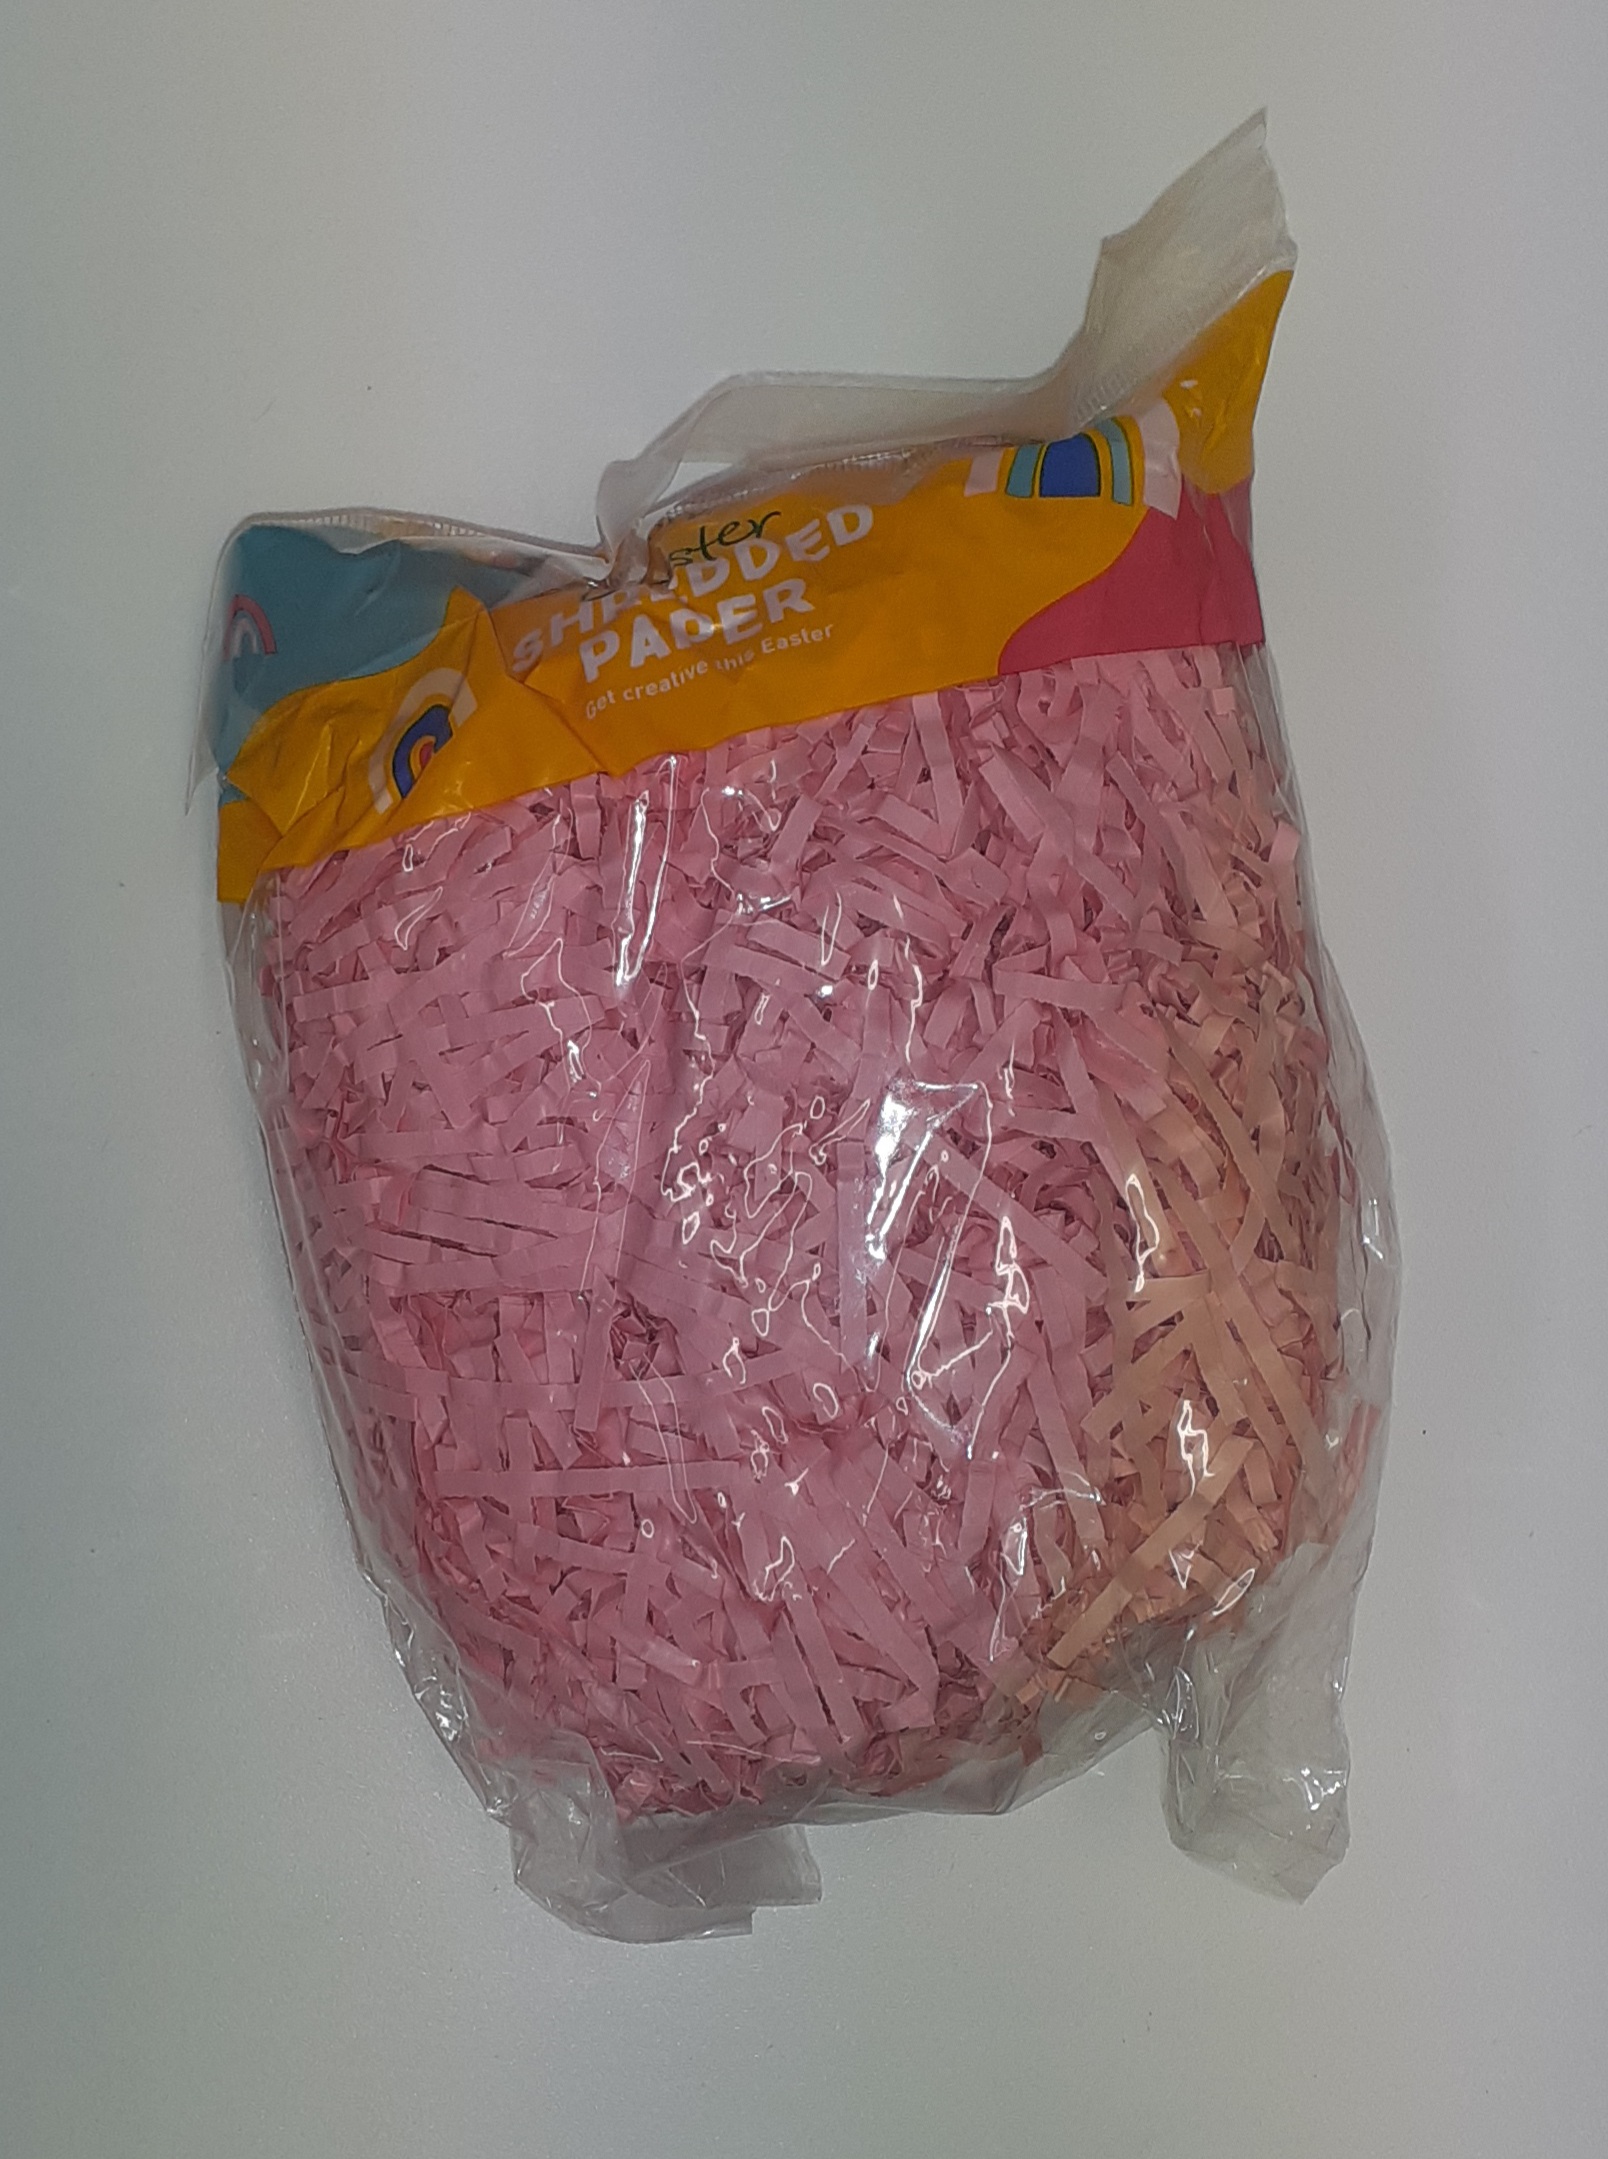 George Easter Pink Shredded Paper RRP £1 CLEARANCE XL 59p or 2 for £1